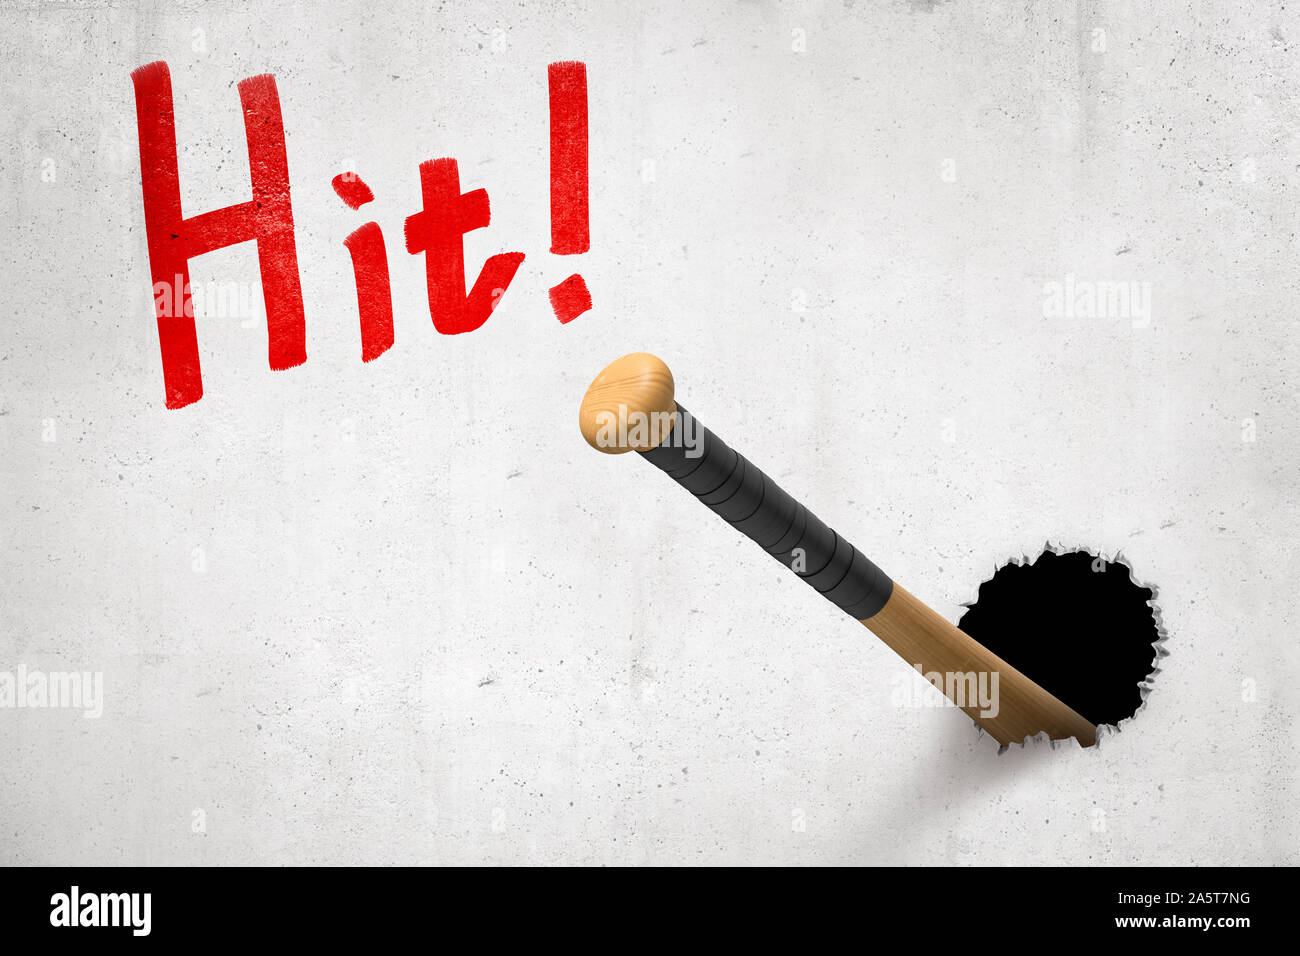 3d rendering of concrete wall with title 'Hit' and baseball bat that has broken hole in the wall and is sticking out of it. Stock Photo